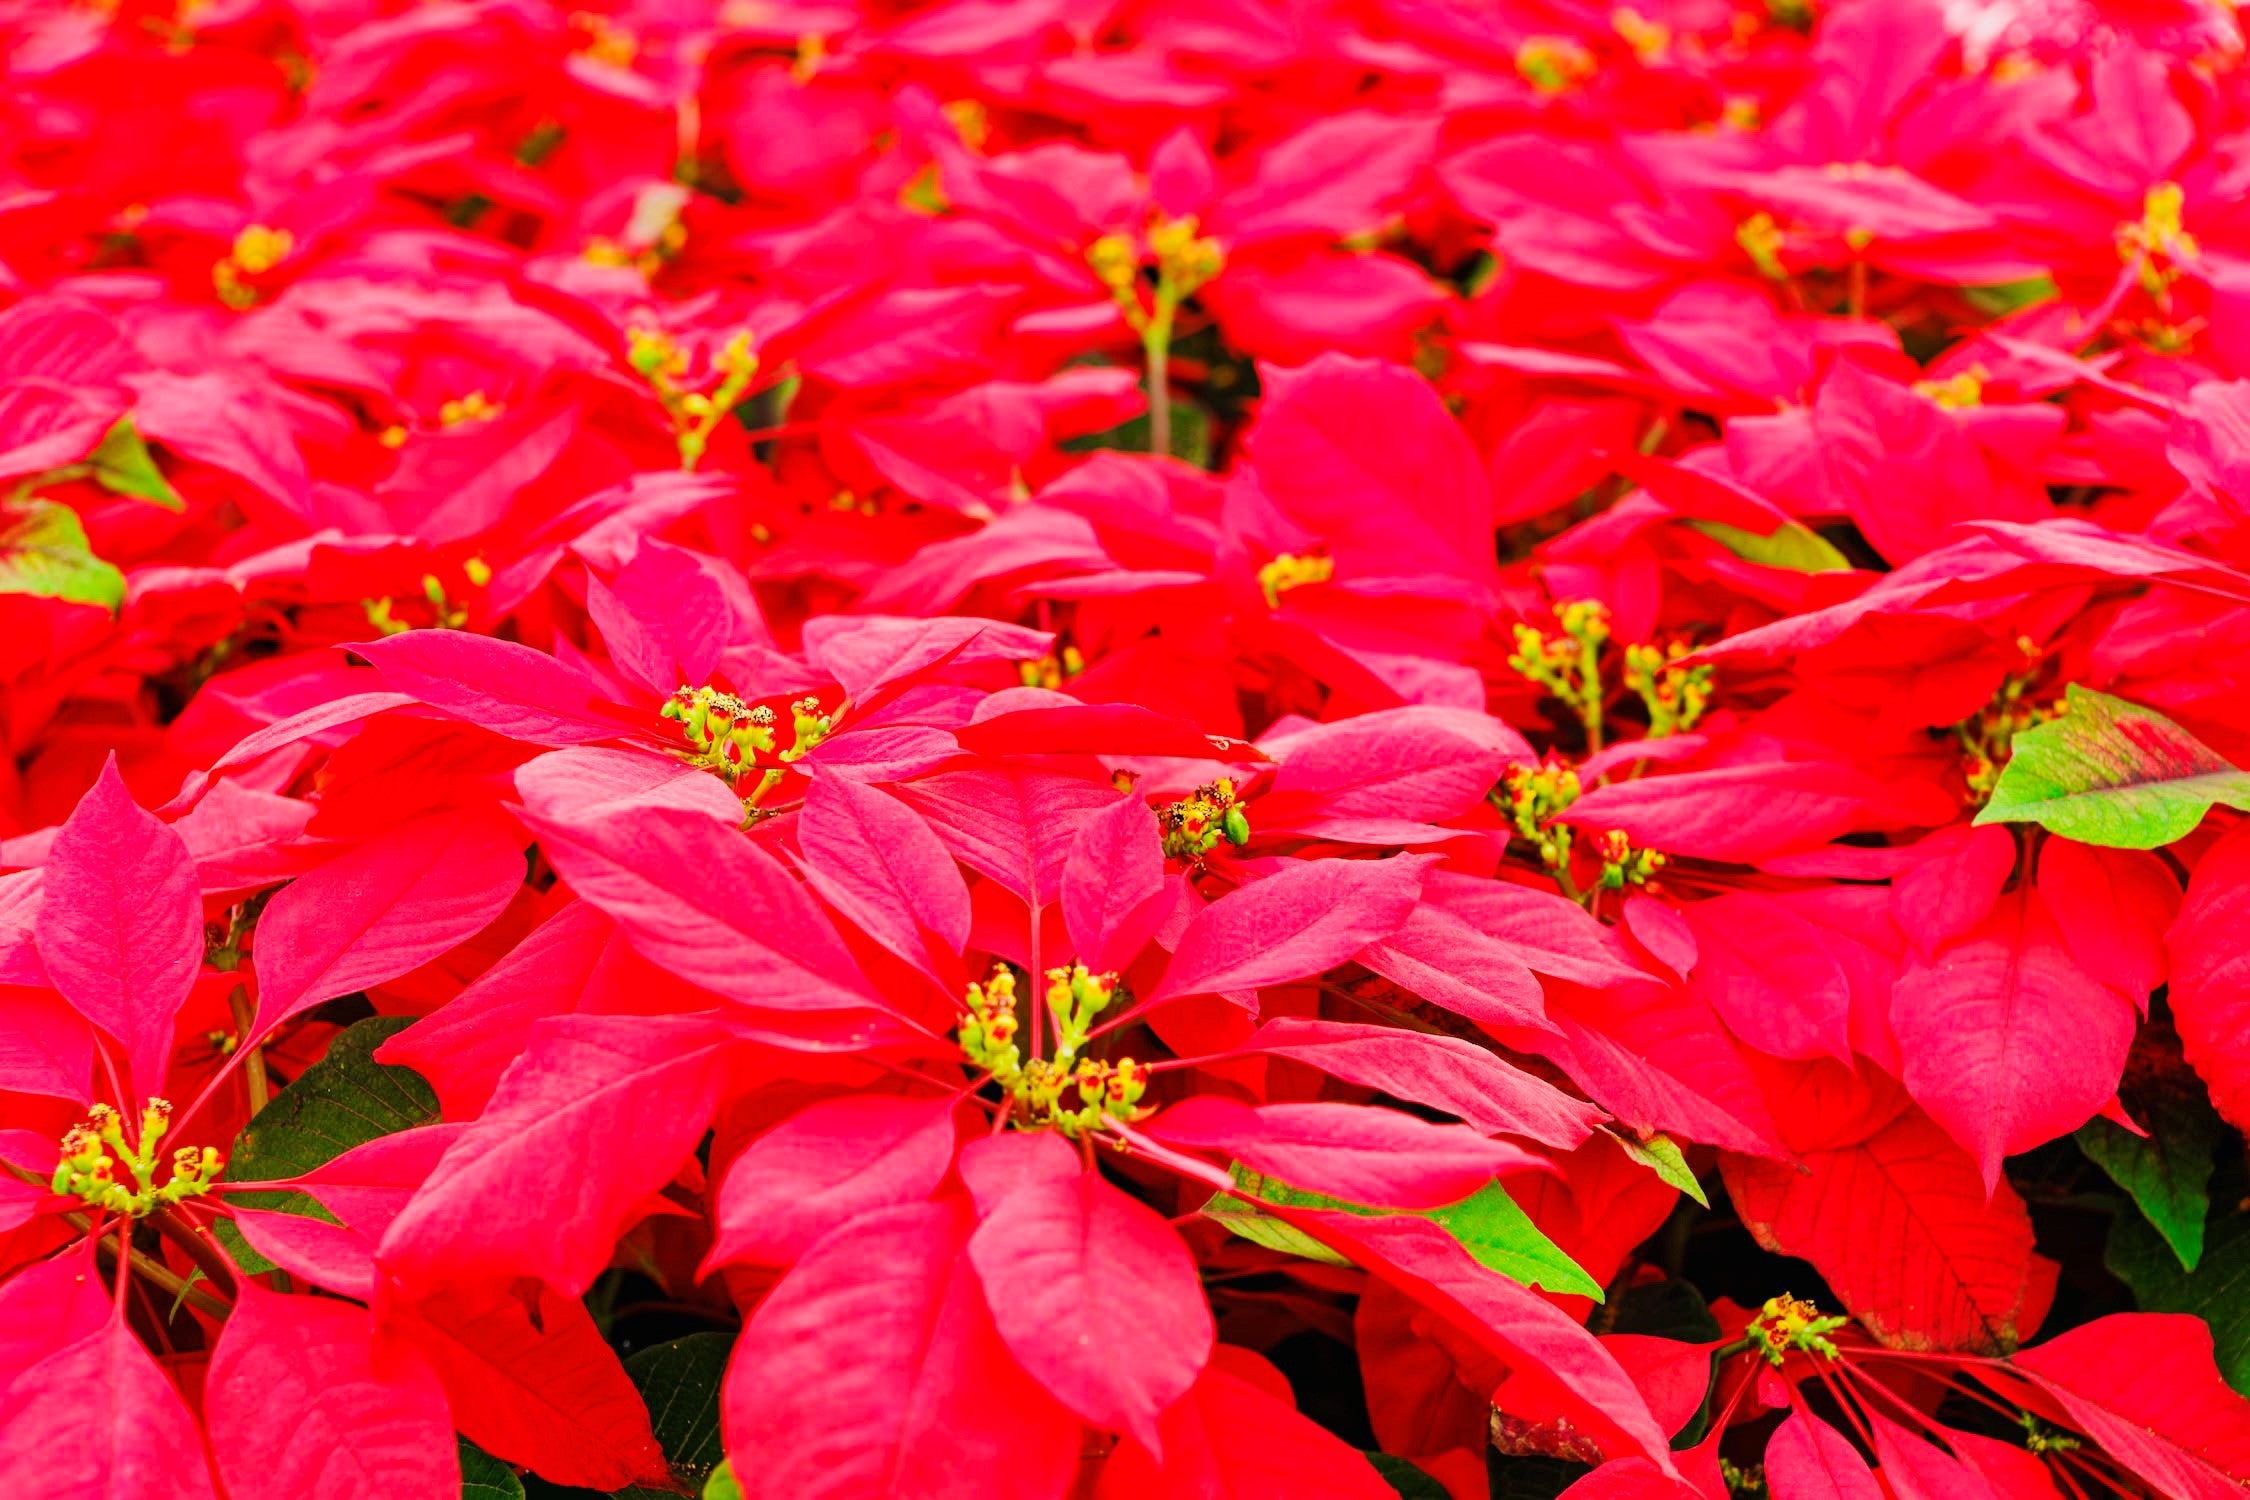 Red Poinsettias On Display For Christmas In A Holiday Decor Display